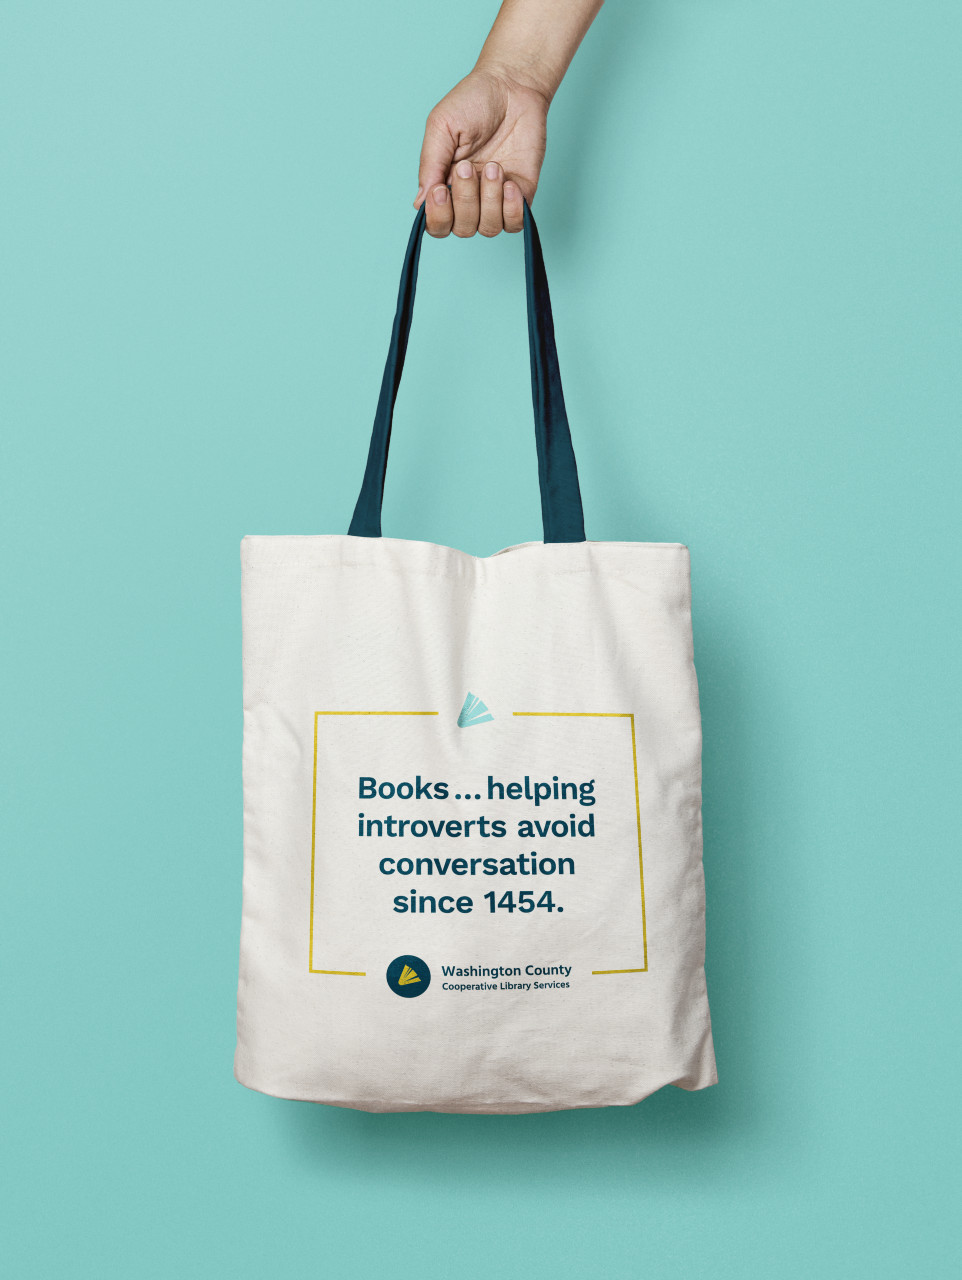 Tote bag that says: Books ... helping introverts avoid conversation since 1454